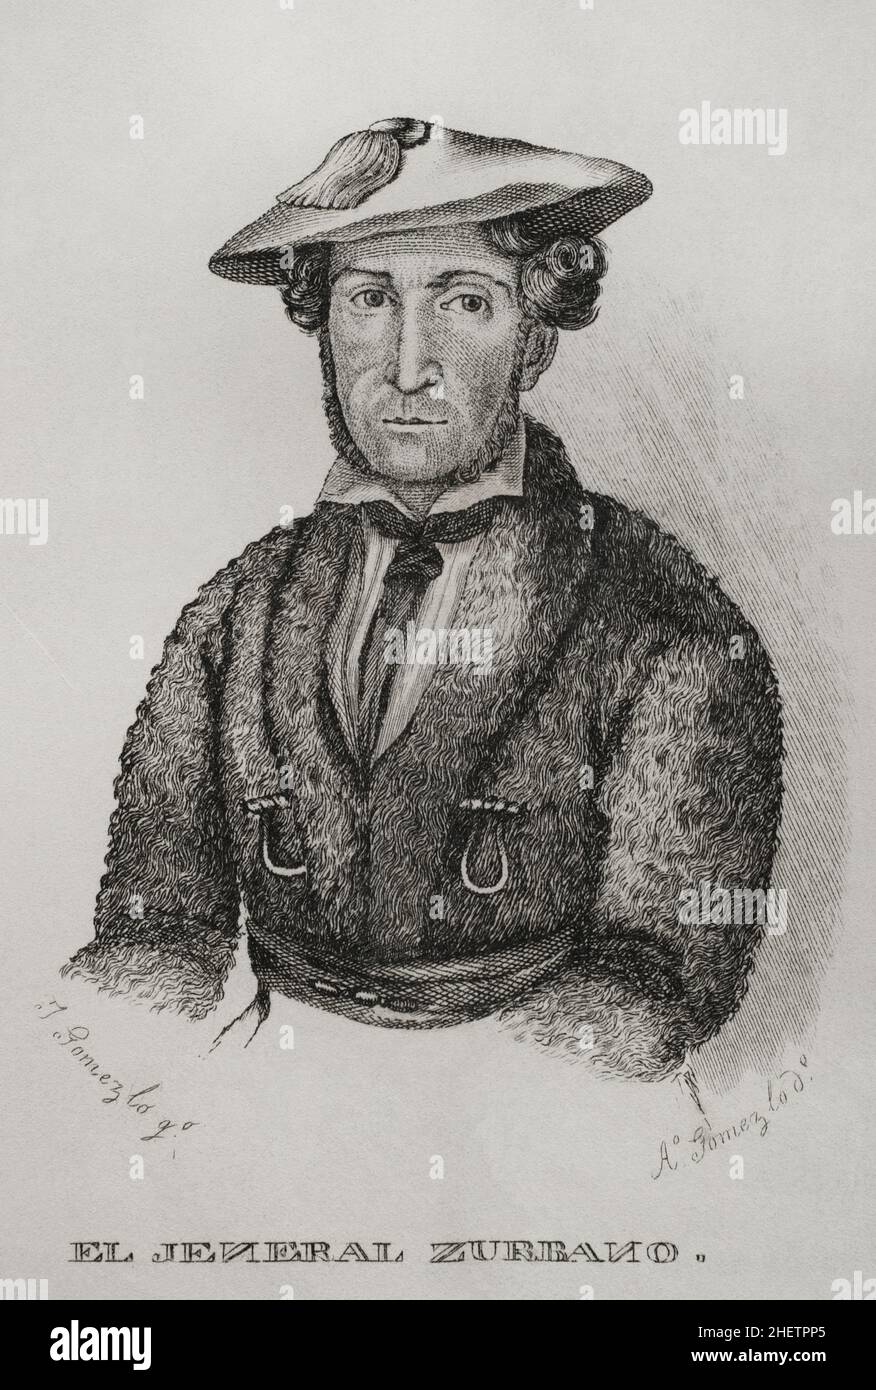 Martin Zurbano (1788-1845). Spanish guerrilla fighter. He fought in the First Carlist War on the Isabeline side (Liberal side). Portrait. Illustration by Antonio Gómez. Engraving by José Gómez. Panorama Español, Crónica Contemporánea. Volume III. Madrid, 1845. Stock Photo